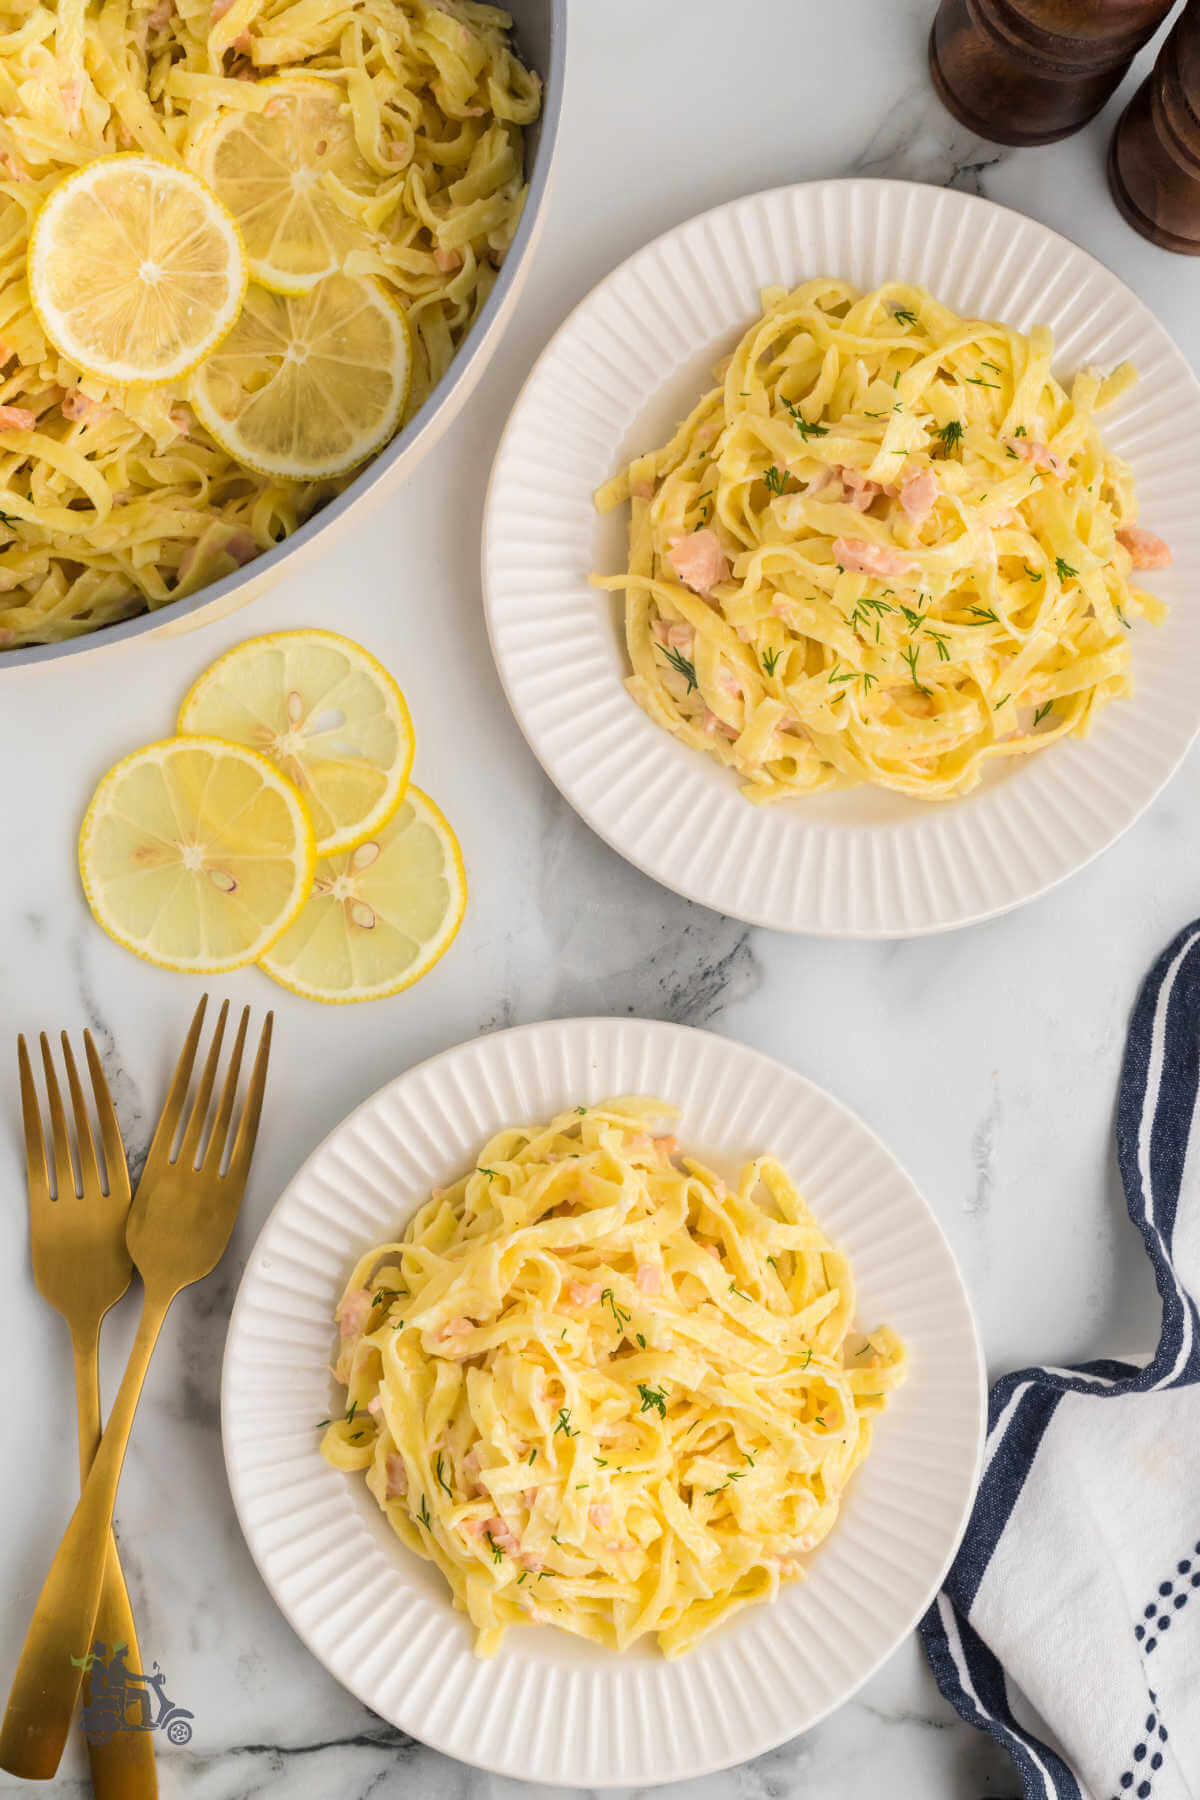 Two white plates with servings of tagliatelle al salmone with fresh dill sprinkled on top.
